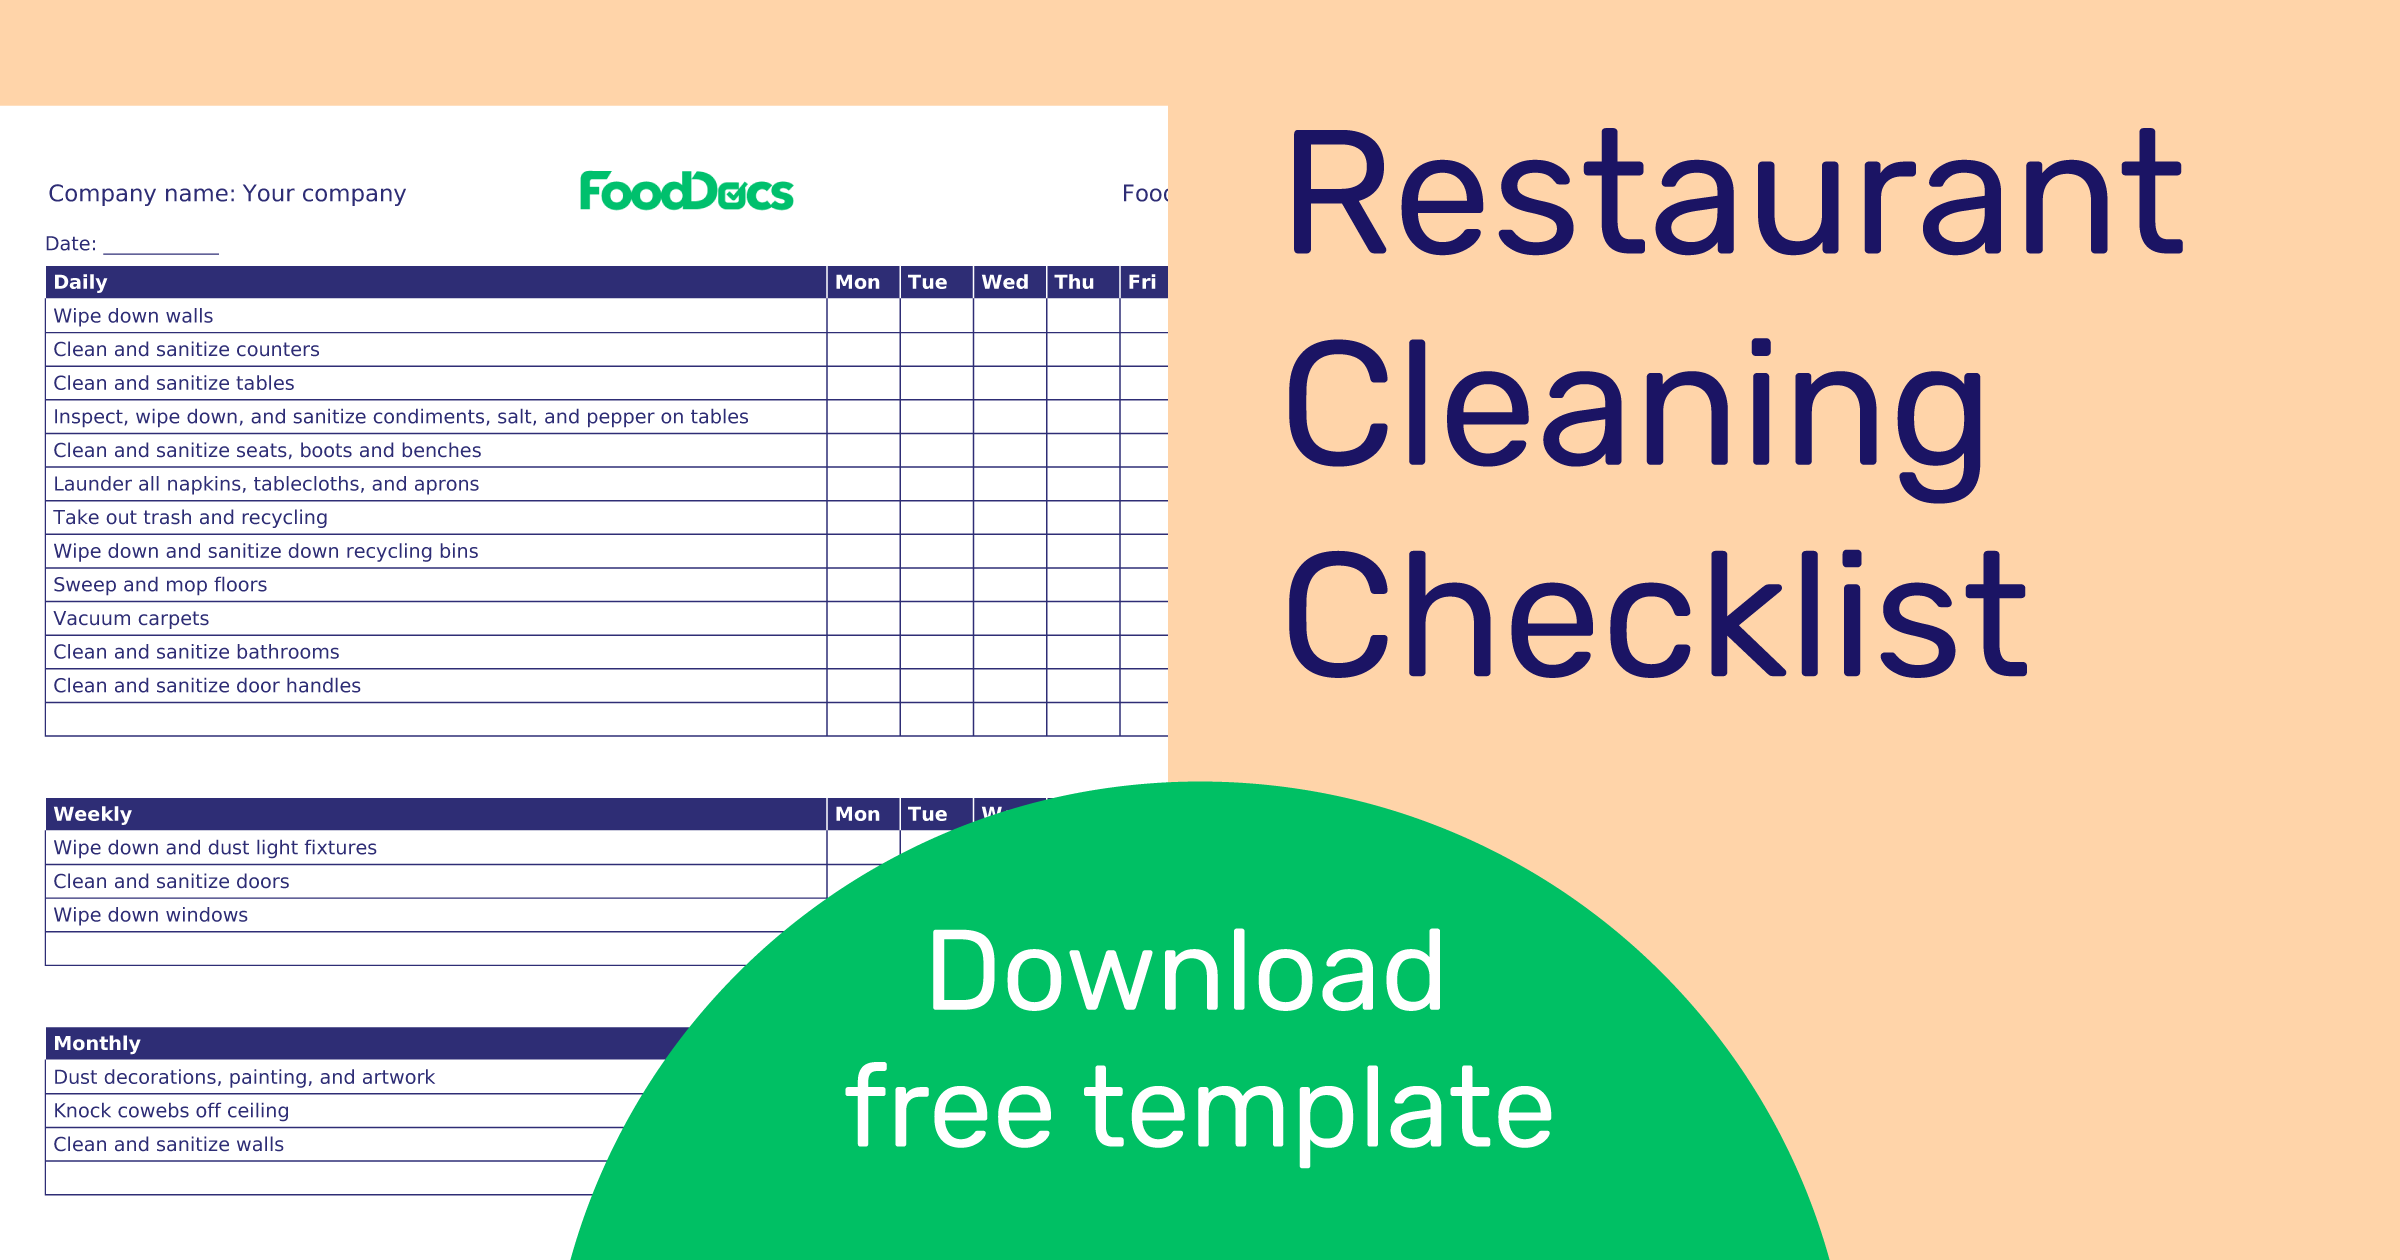 Restaurant Cleaning Checklist | Download Free Template